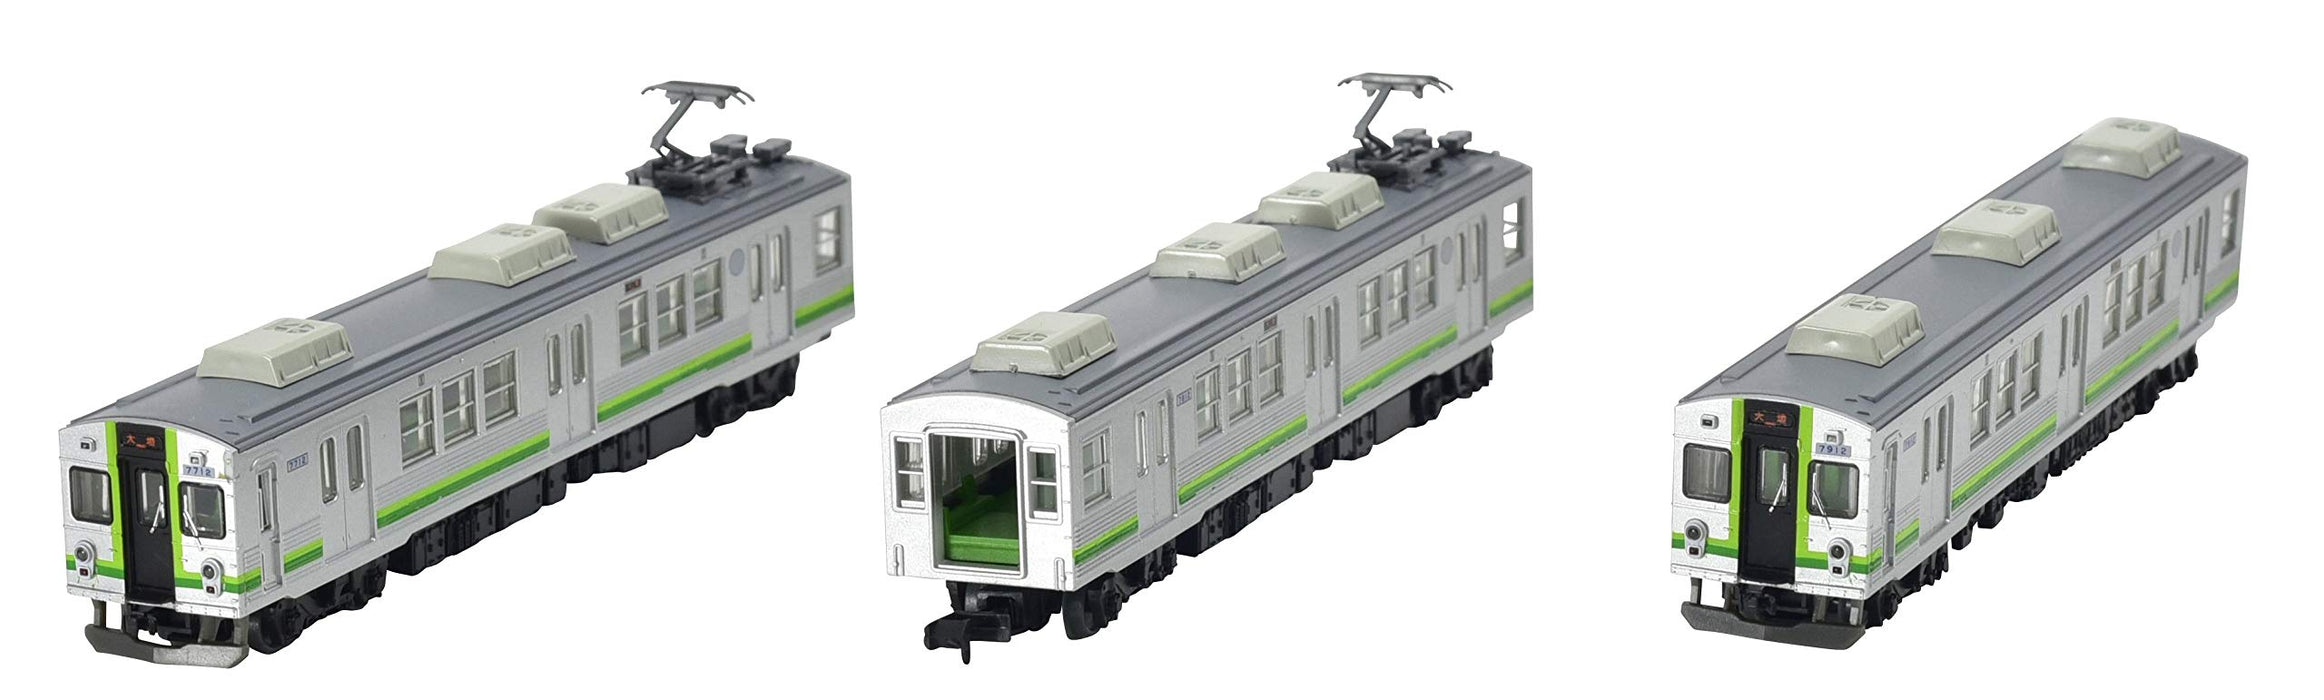 Tomytec Railway Collection 7700 Series 3-Car Set Diorama Supplies - Limited Edition